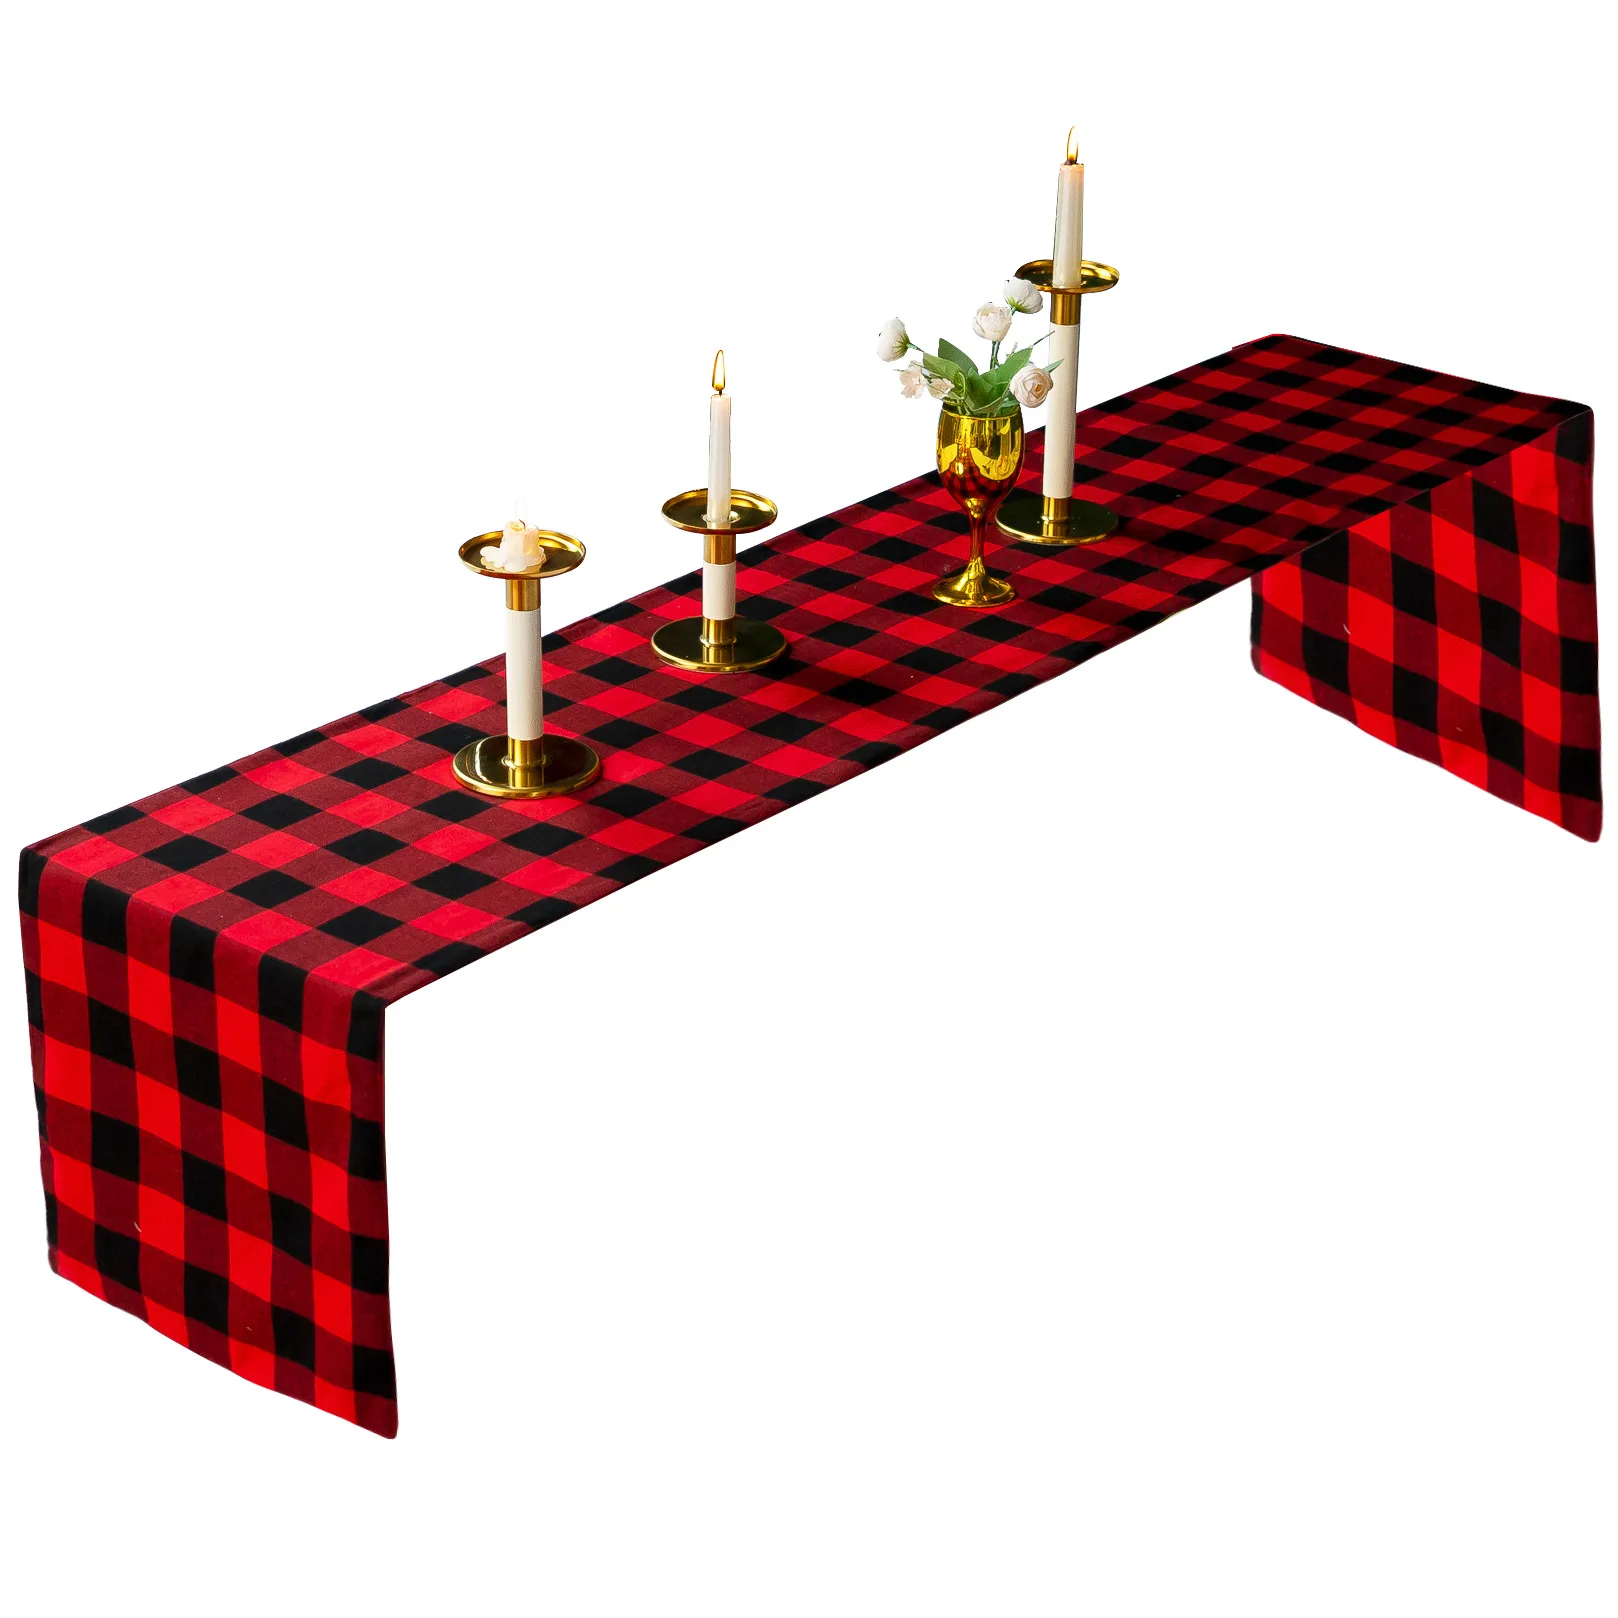 Red and Black Checkered Tablecloth Cotton Black and White Square Plaid Table Runners Decoration